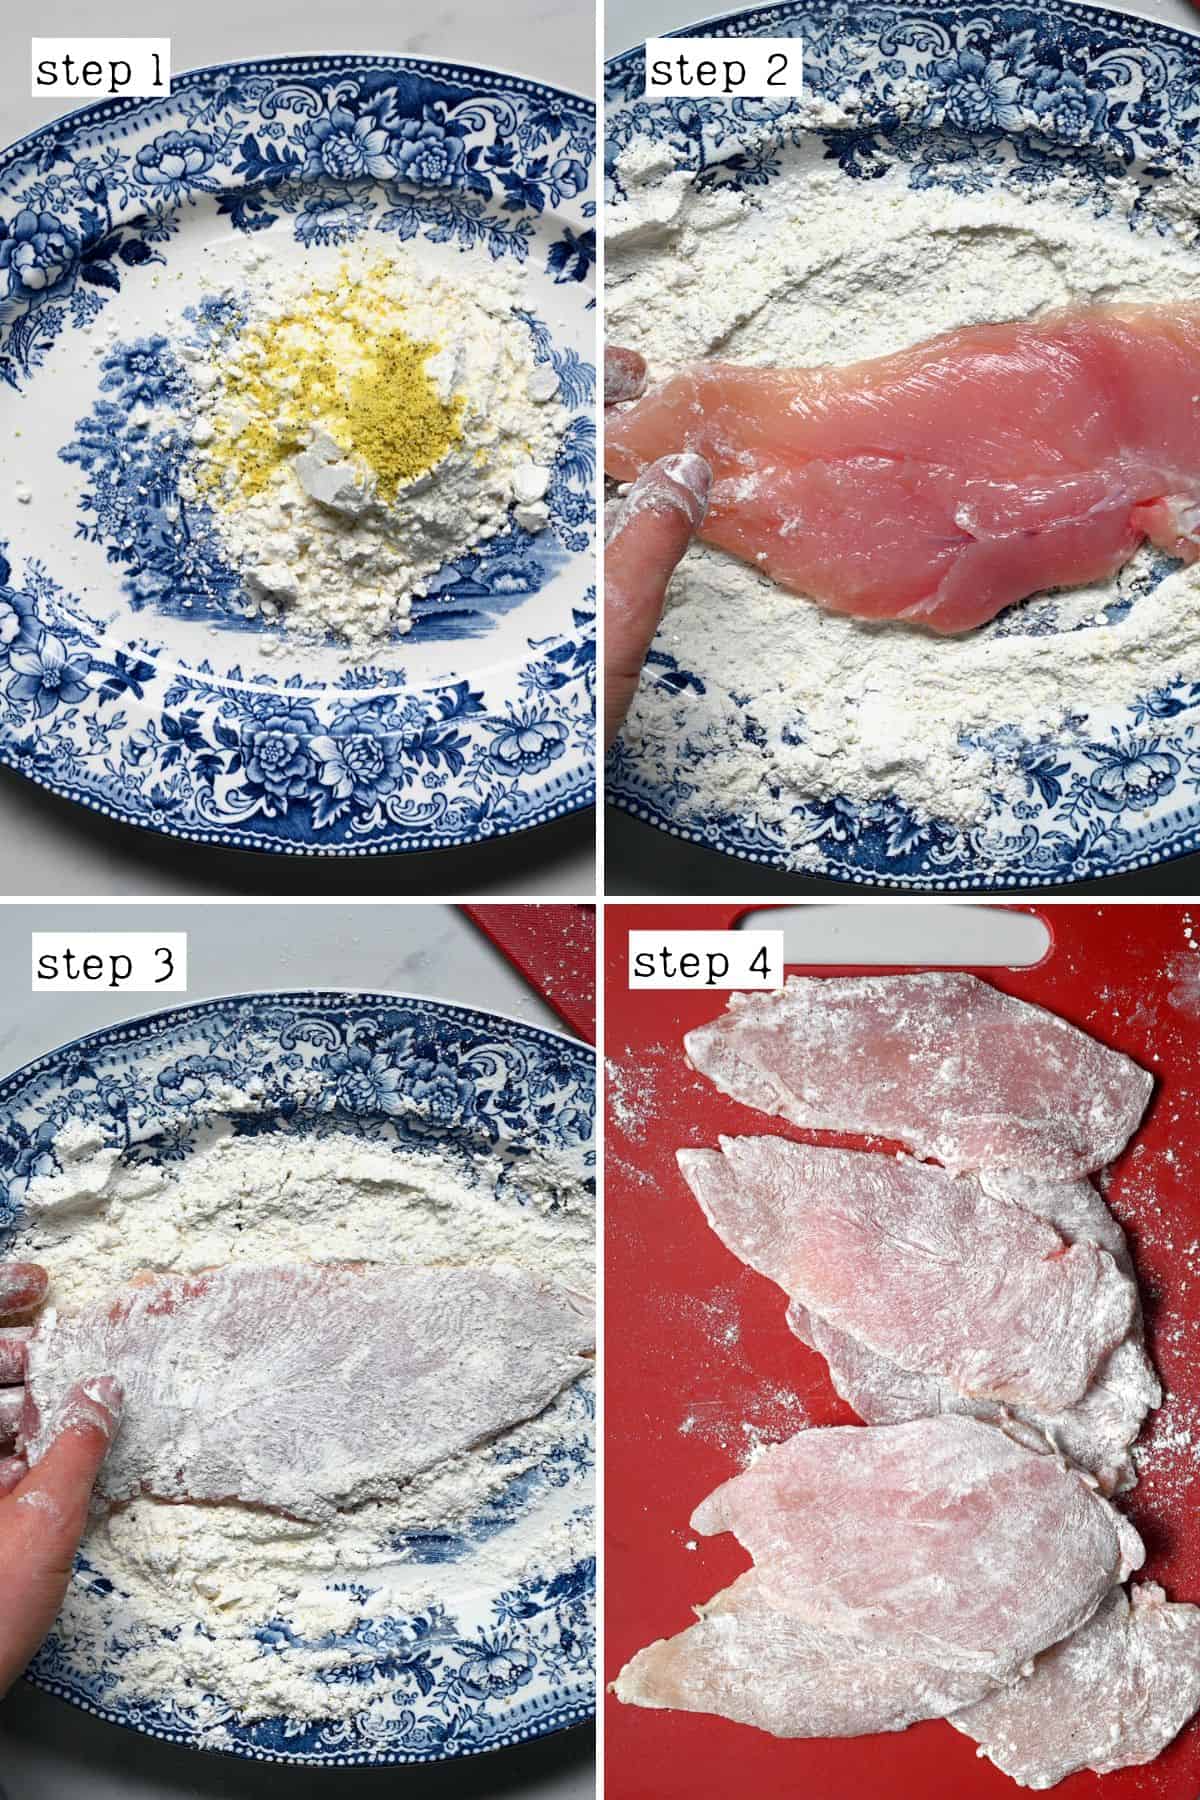 Steps for breading chicken with flour